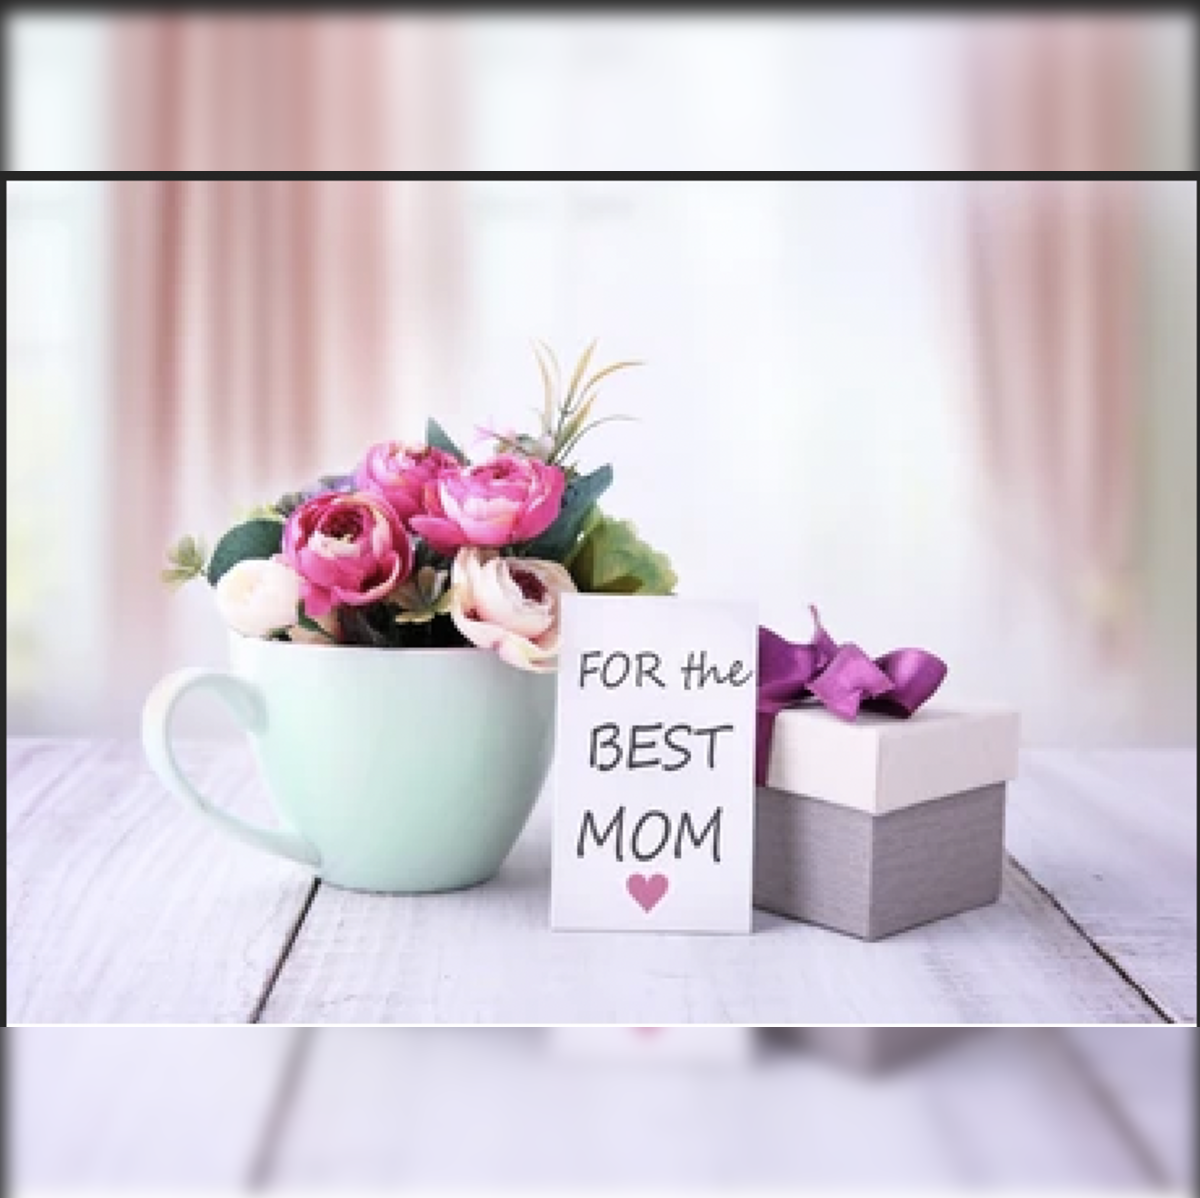 45 Best Mothers Day Gifts From Daughter | Best gifts for mom, Mothers day  gifts from daughter, Best mothers day gifts